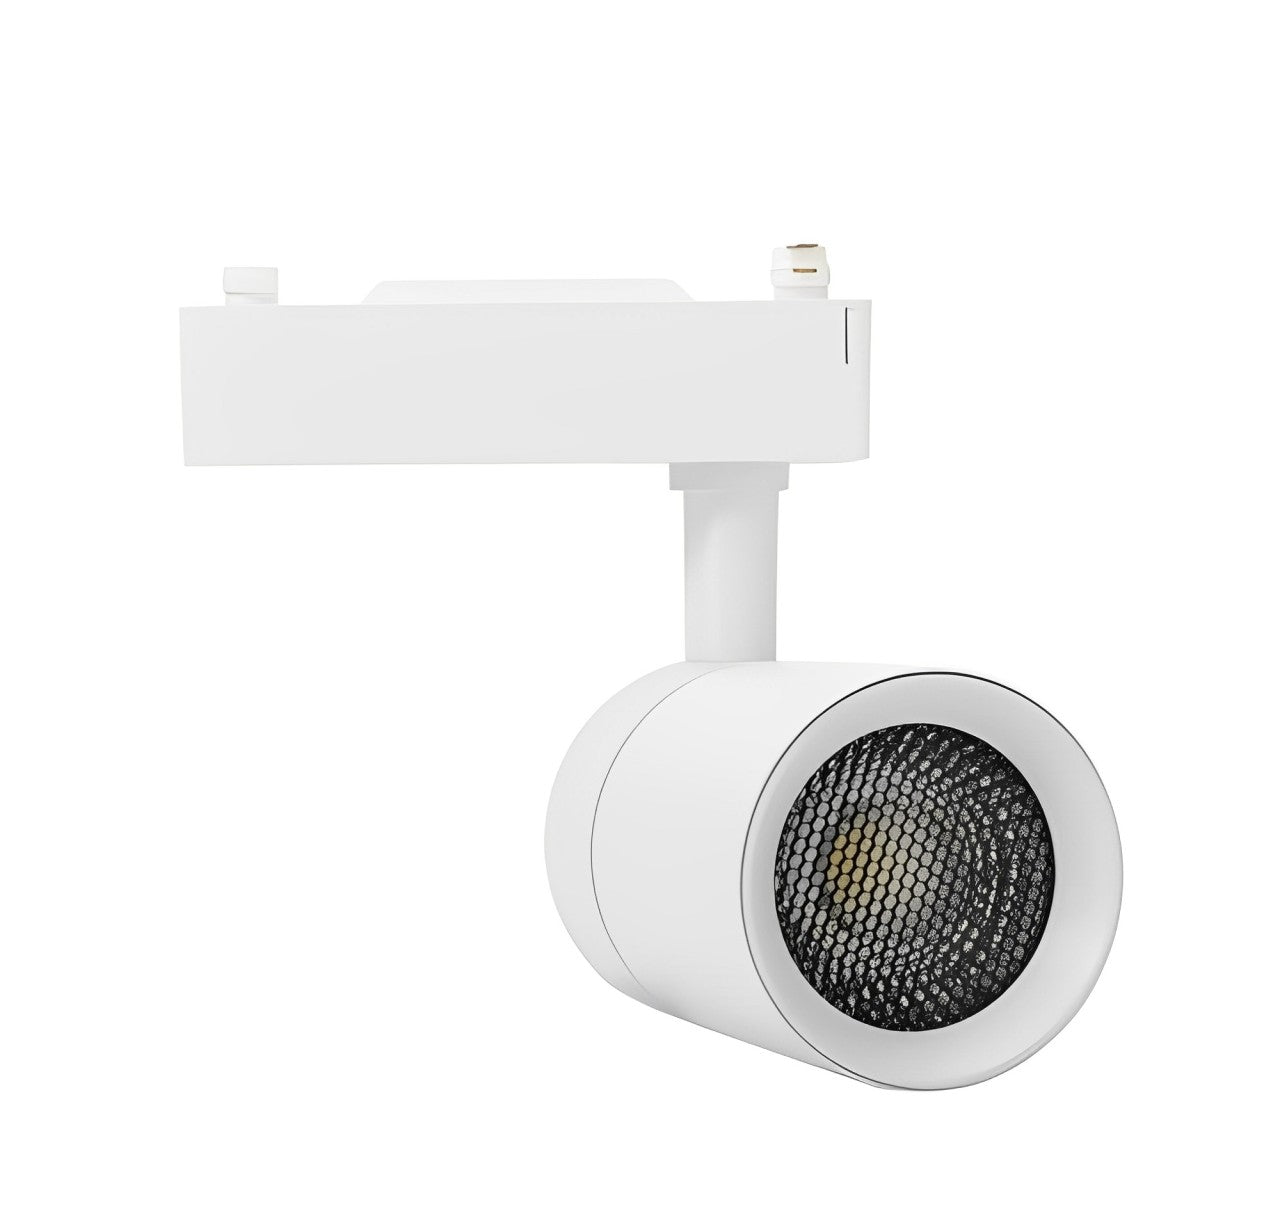 35W BAZUKA 3-wire Track Spot with Honeycomb lens (Launch Special) - Future Light - LED Lights South Africa